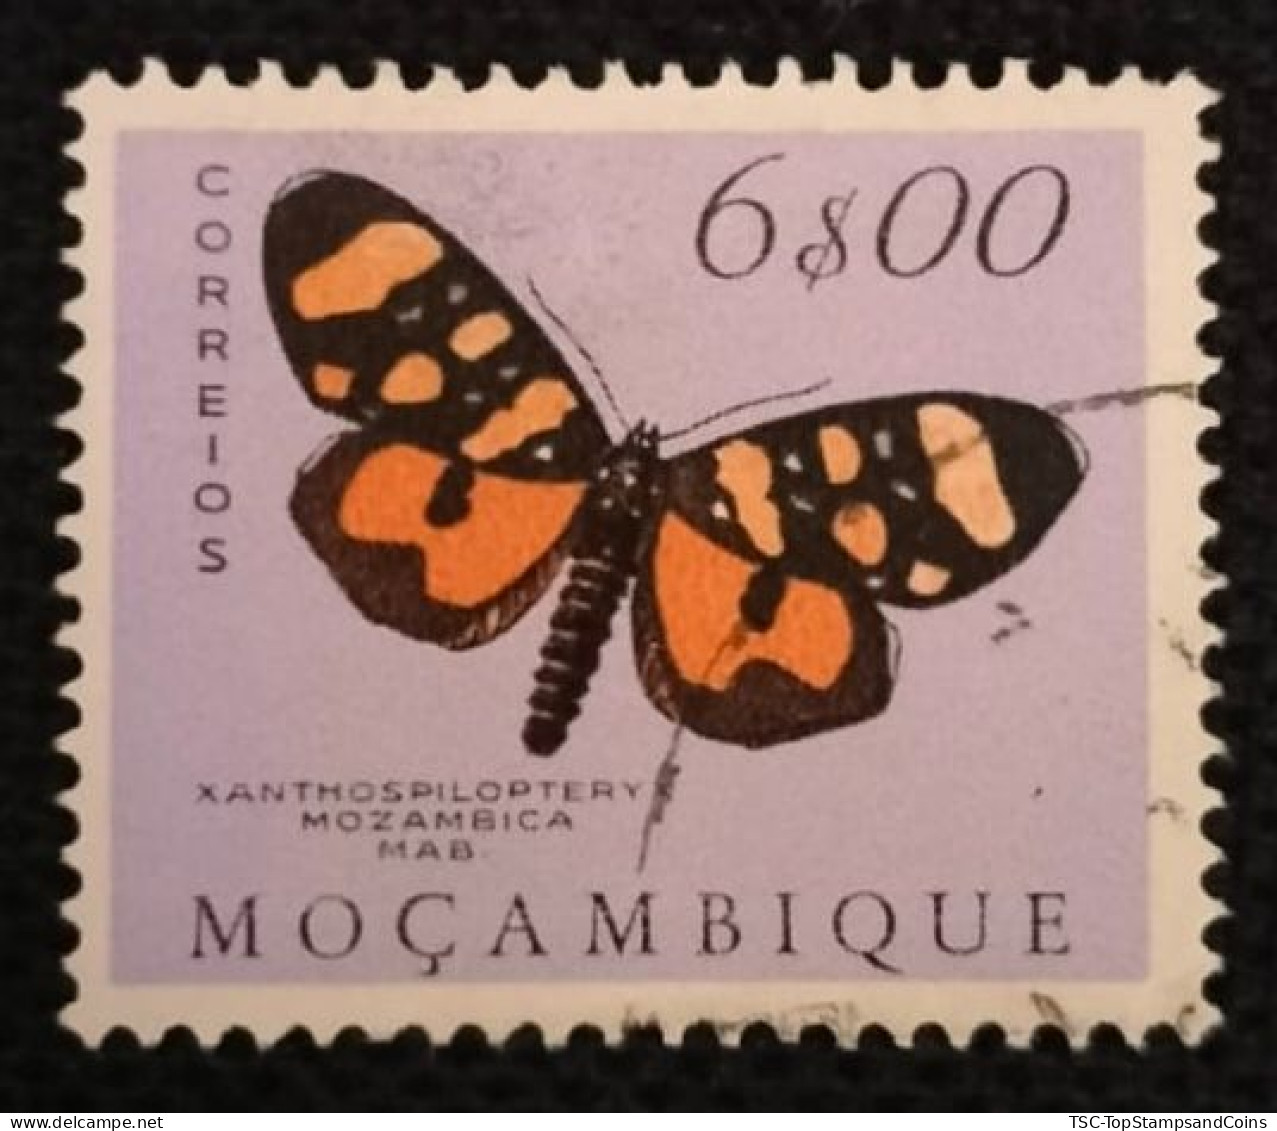 MOZPO0404UC - Mozambique Butterflies - 6$00 Used Stamp - Mozambique - 1953 - Mosambik